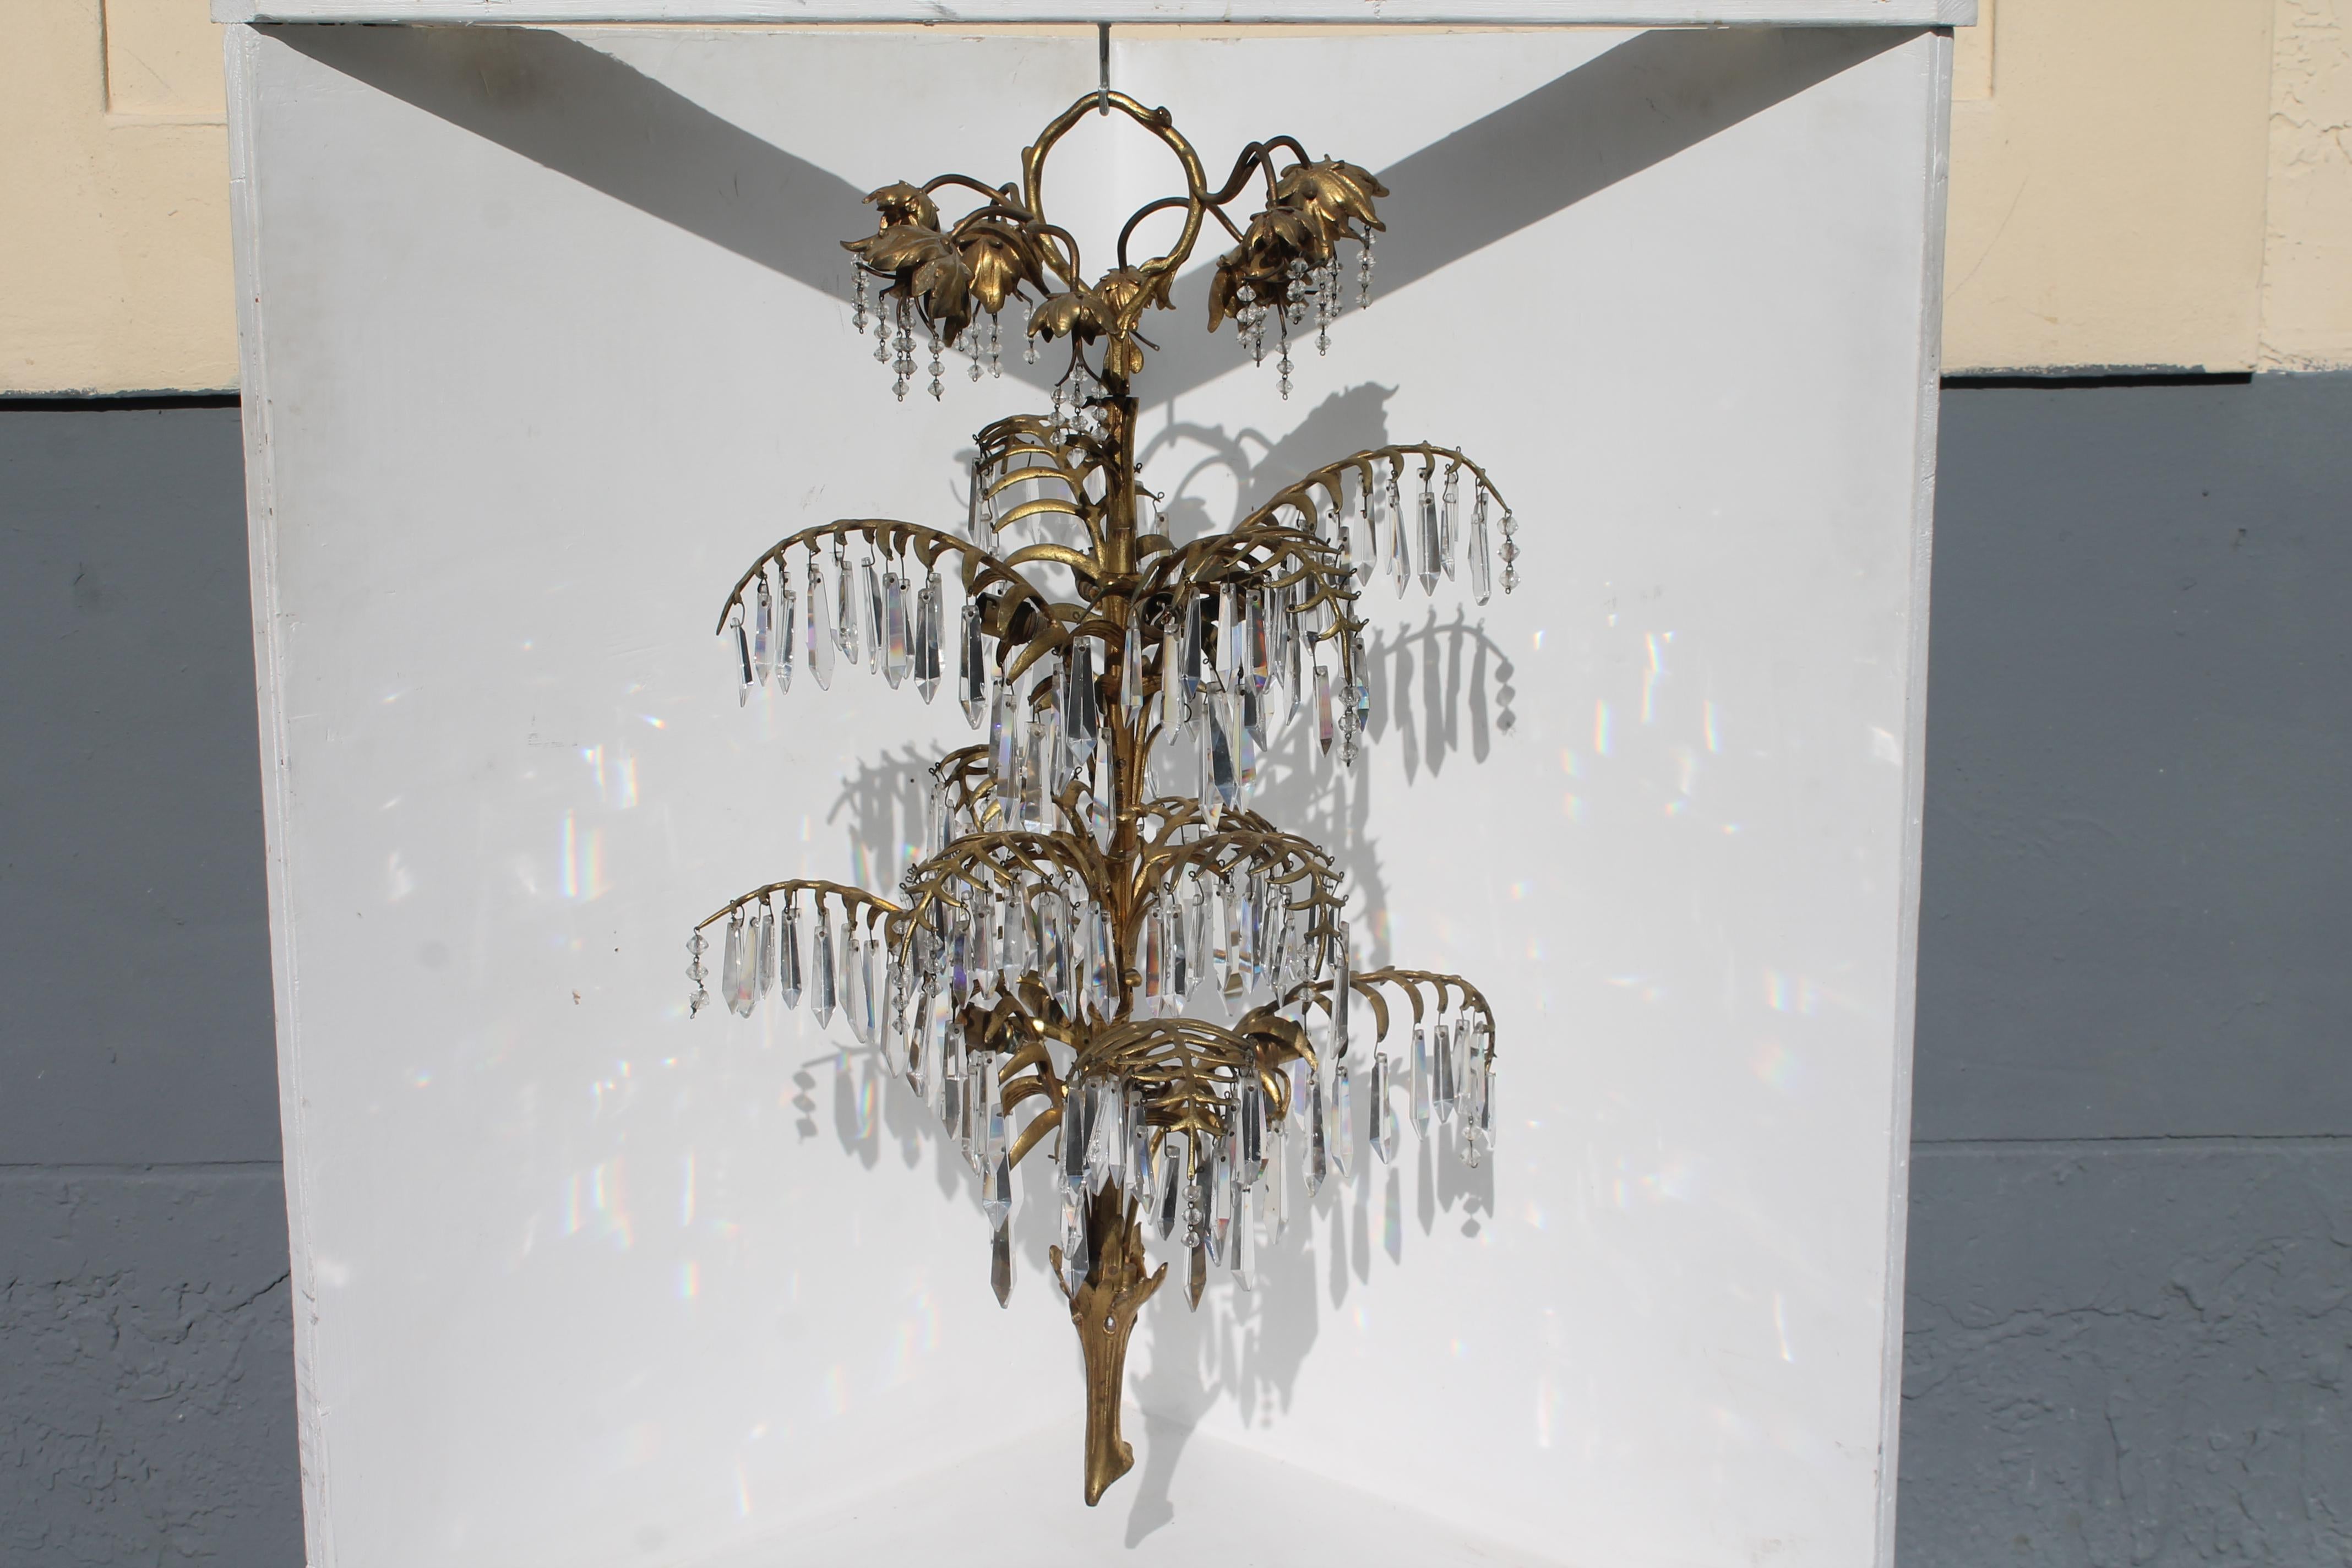 This stunning Gilt Bronze Palm Tree Chandelier was crafted by Josef Hoffmann and it is an Original circe 1890. Original Baccarat Crystal adorned. There are 